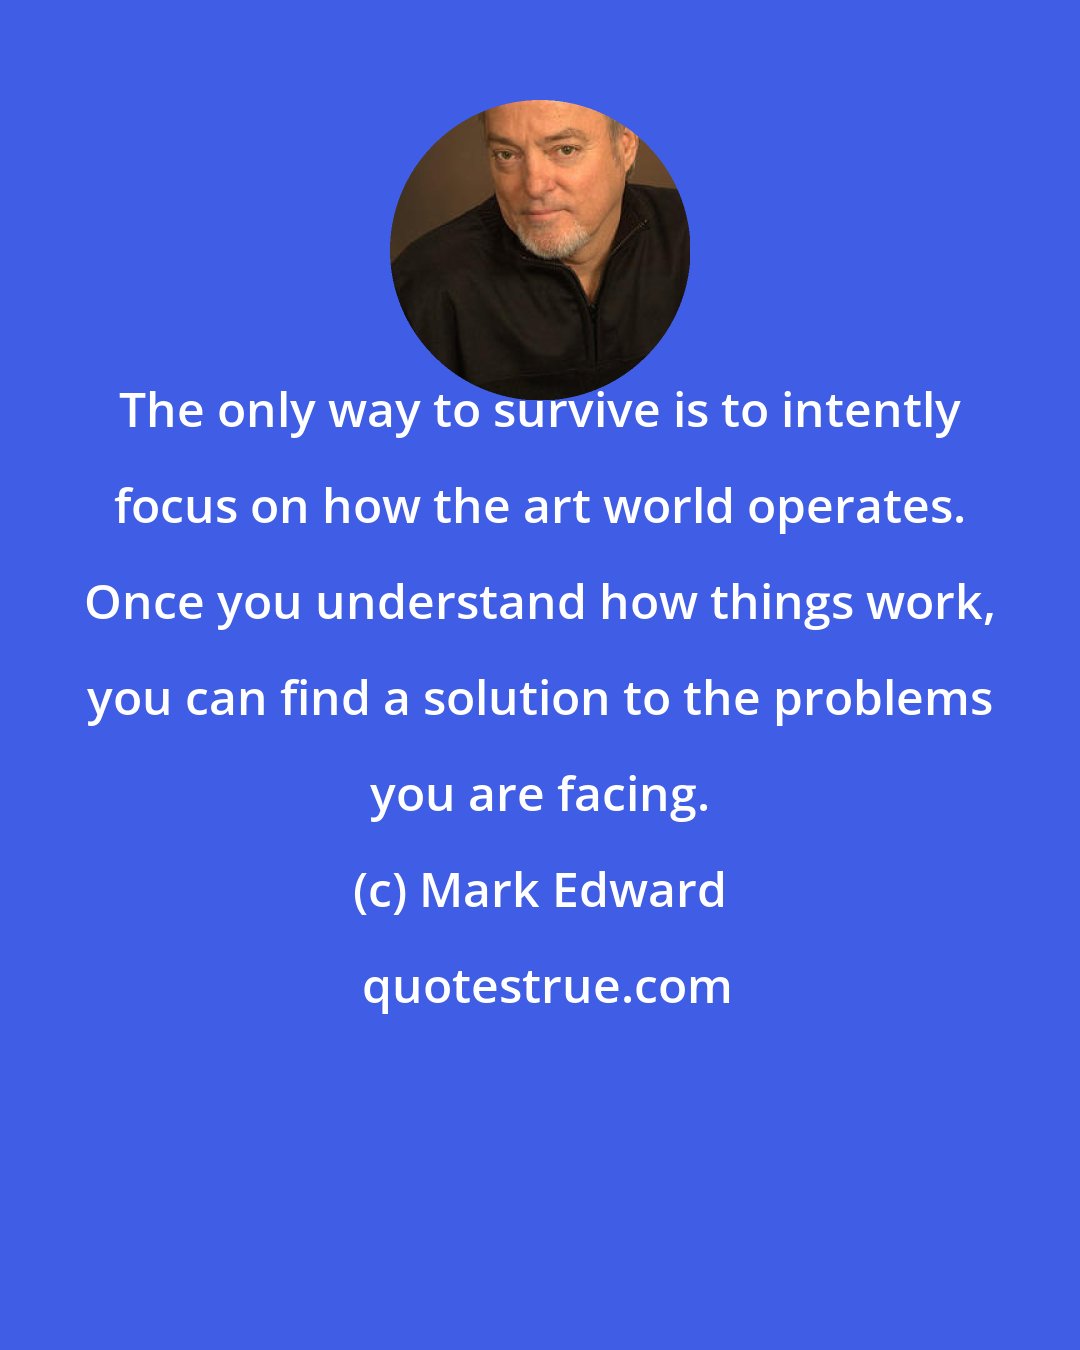 Mark Edward: The only way to survive is to intently focus on how the art world operates. Once you understand how things work, you can find a solution to the problems you are facing.